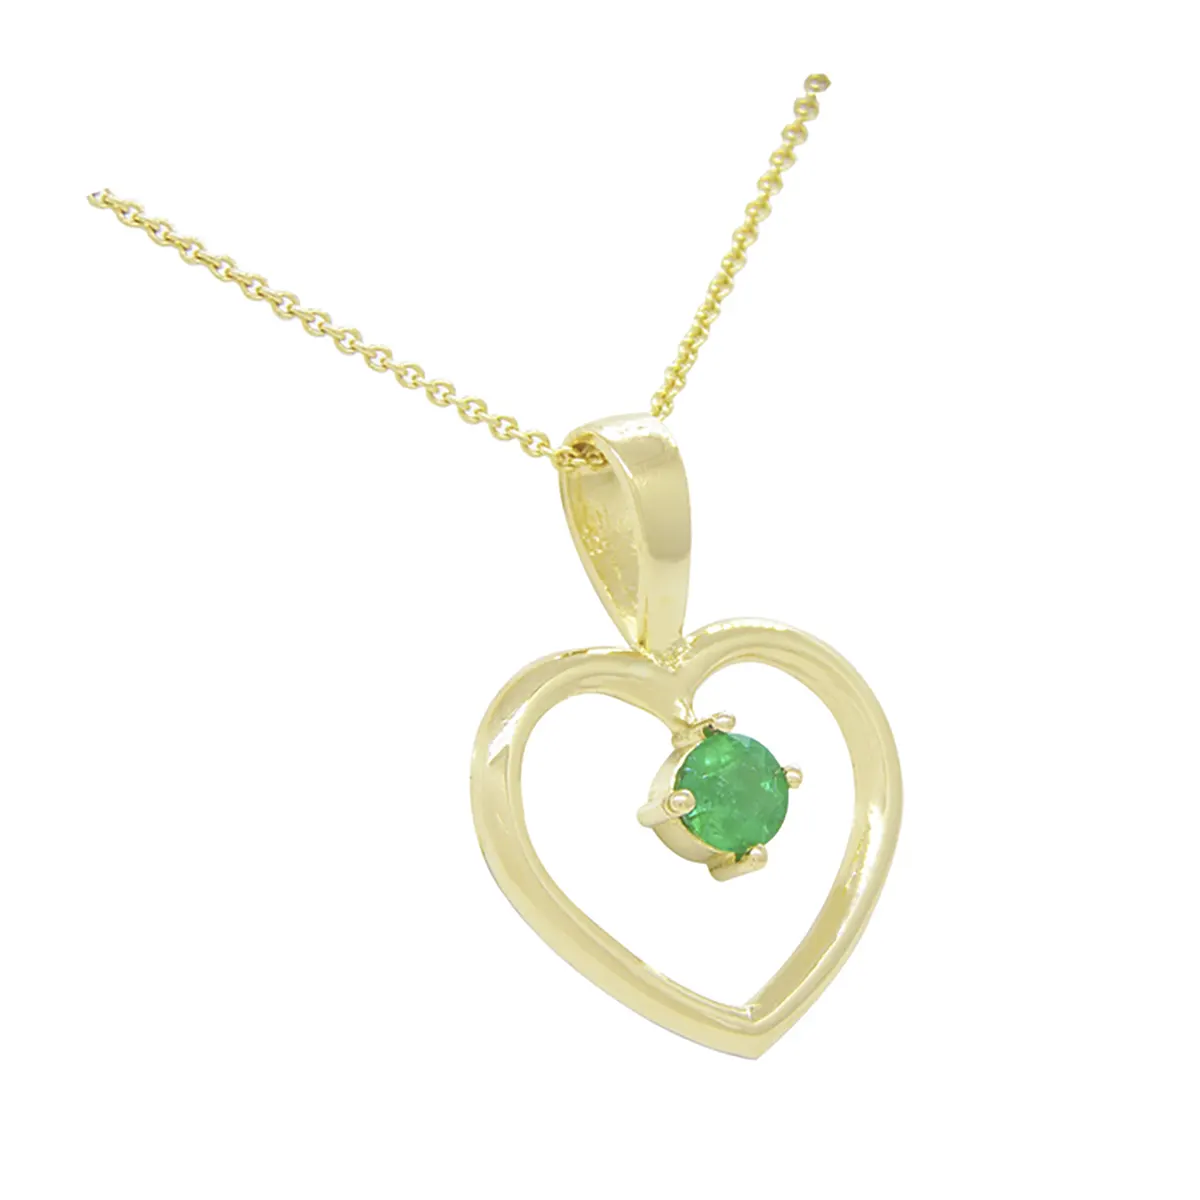 The heart form pendant has a rounded and smooth finished in its gold high polish surface that creates a brilliant yellow color